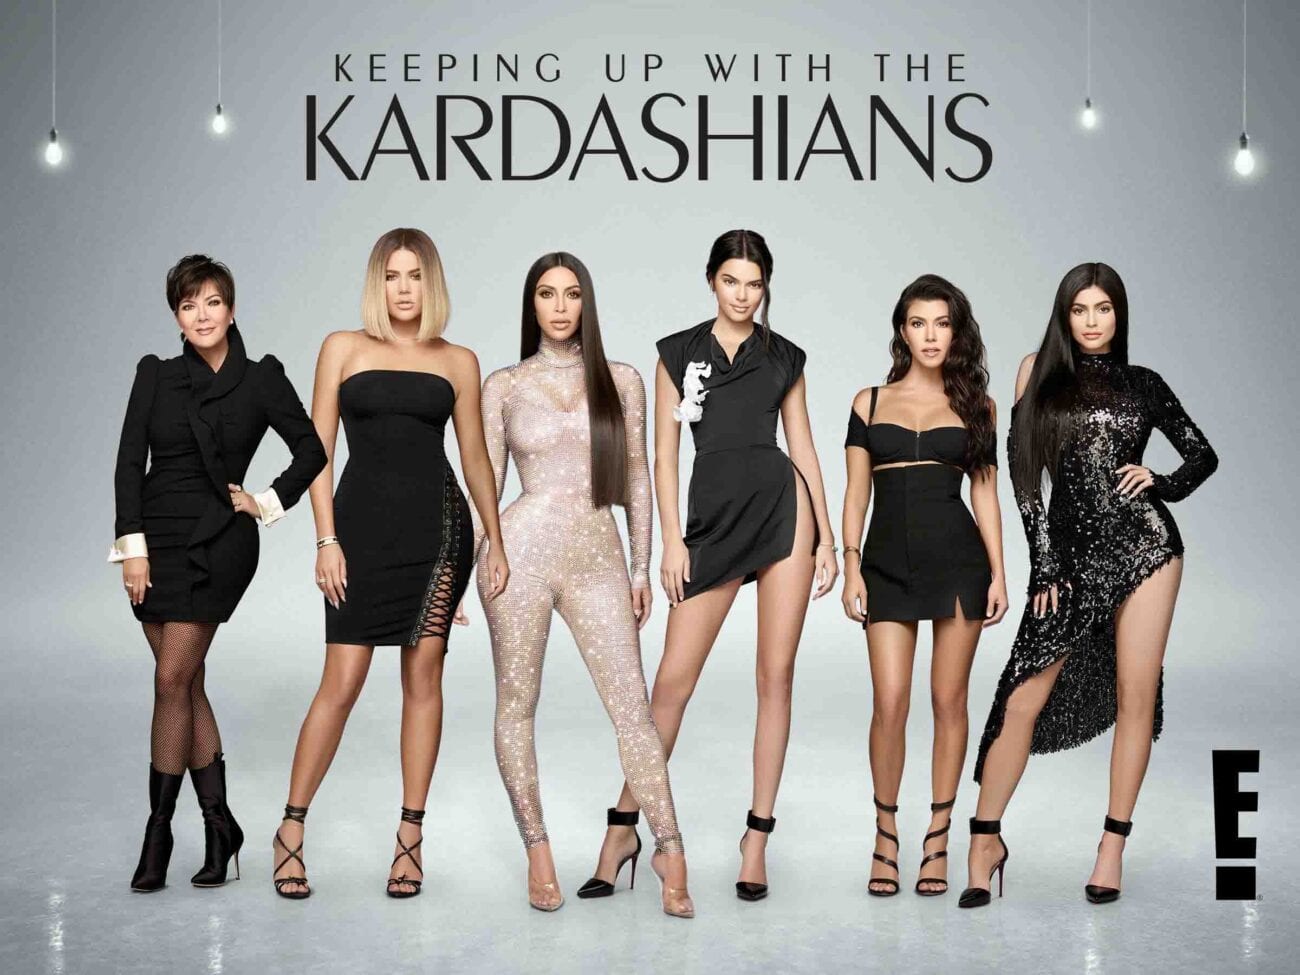 The Kardashian family has dominated reality TV for fourteen years, but all things must end eventually – including 'Keeping Up With The Kardashians.'